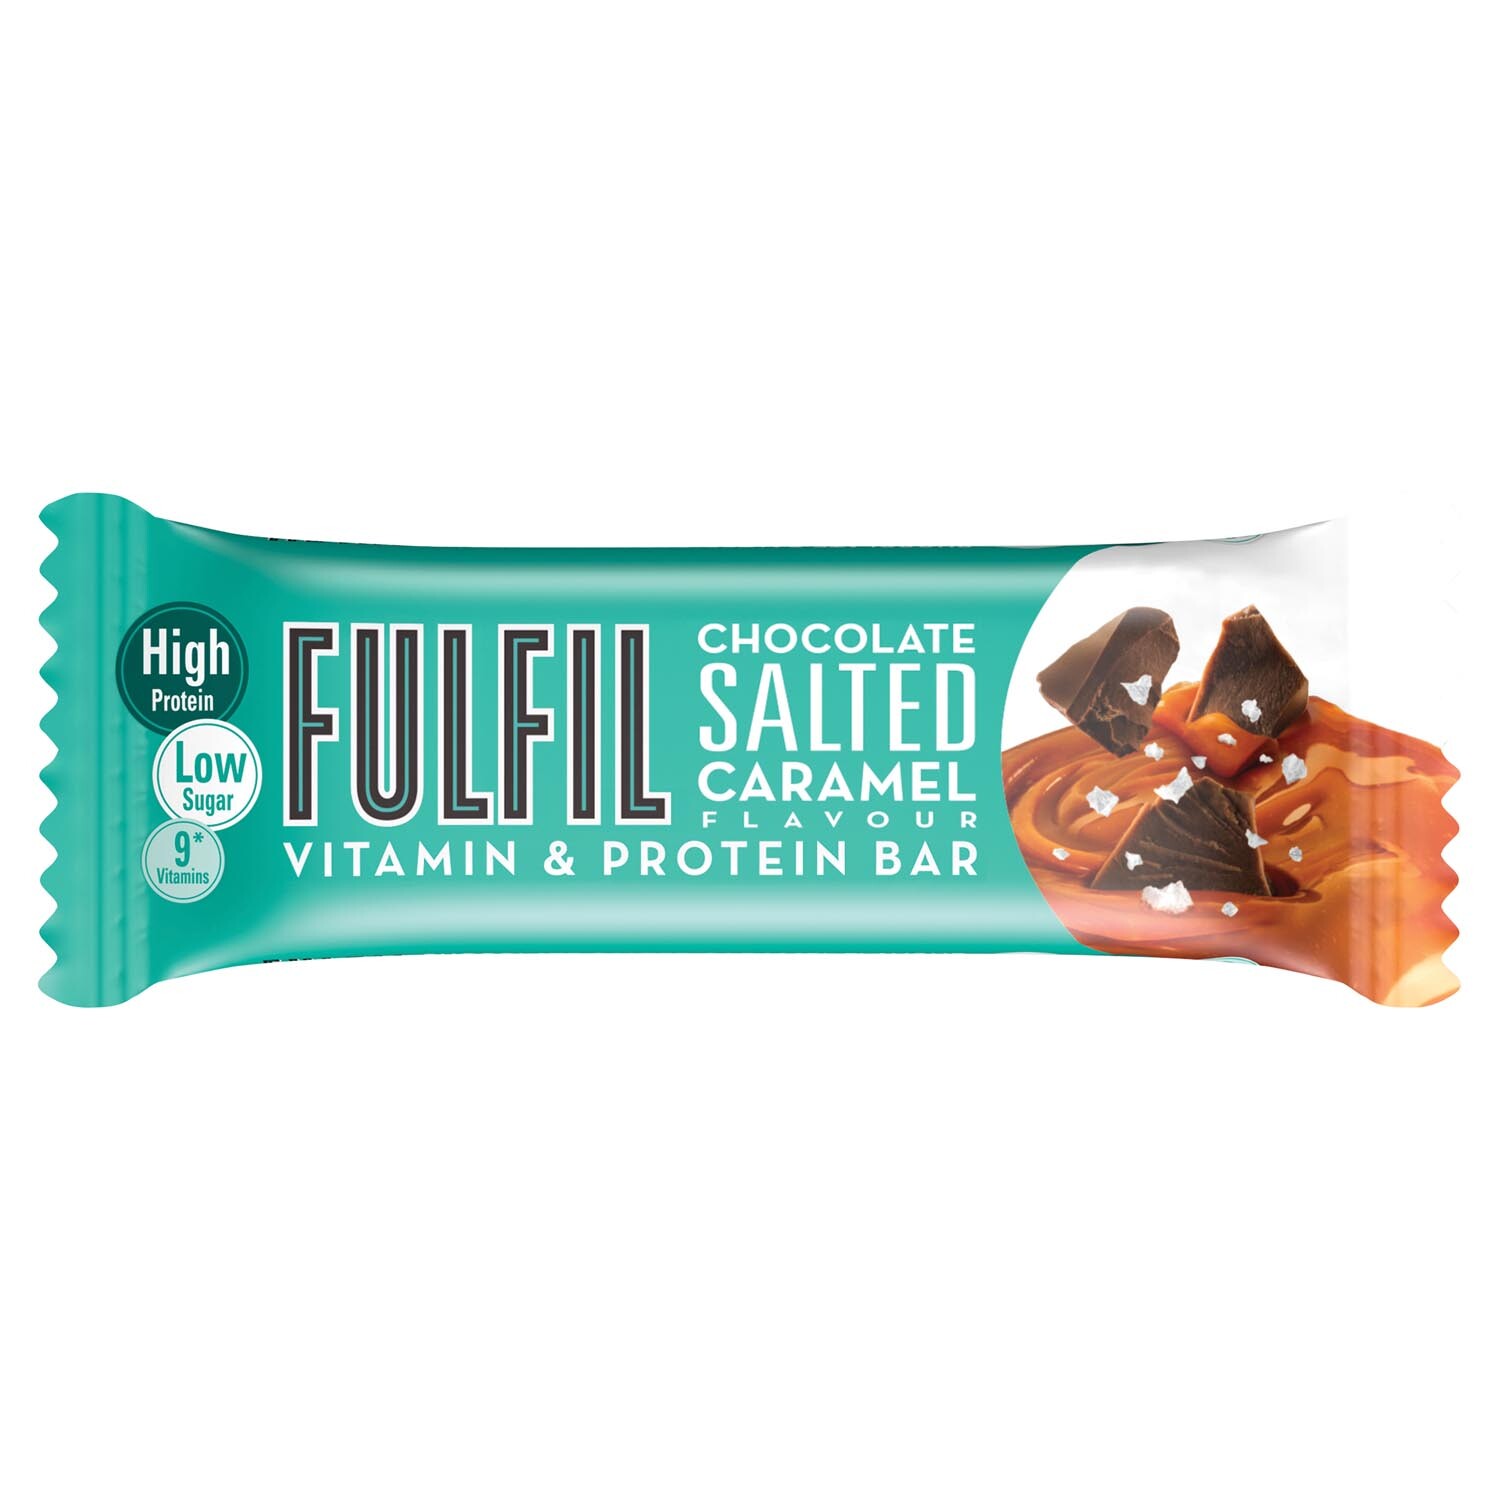 Fulfil Vitamin and Protein Bar - Chocolate Salted Caramel Image 1